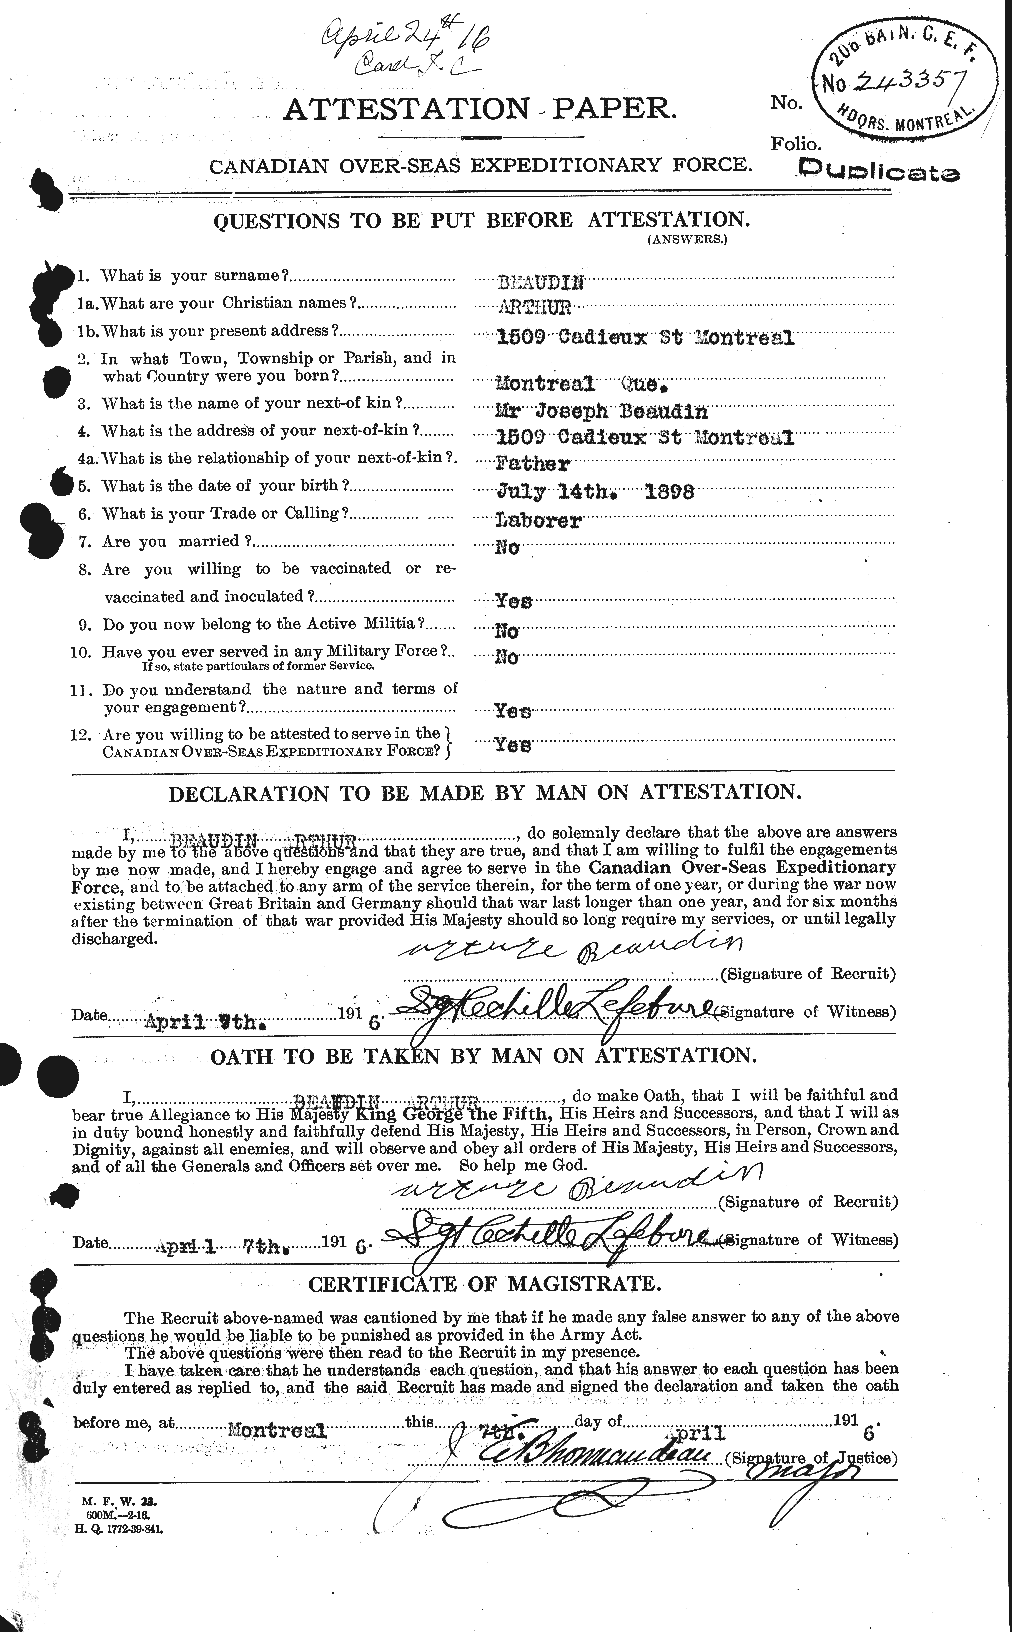 Personnel Records of the First World War - CEF 231155a